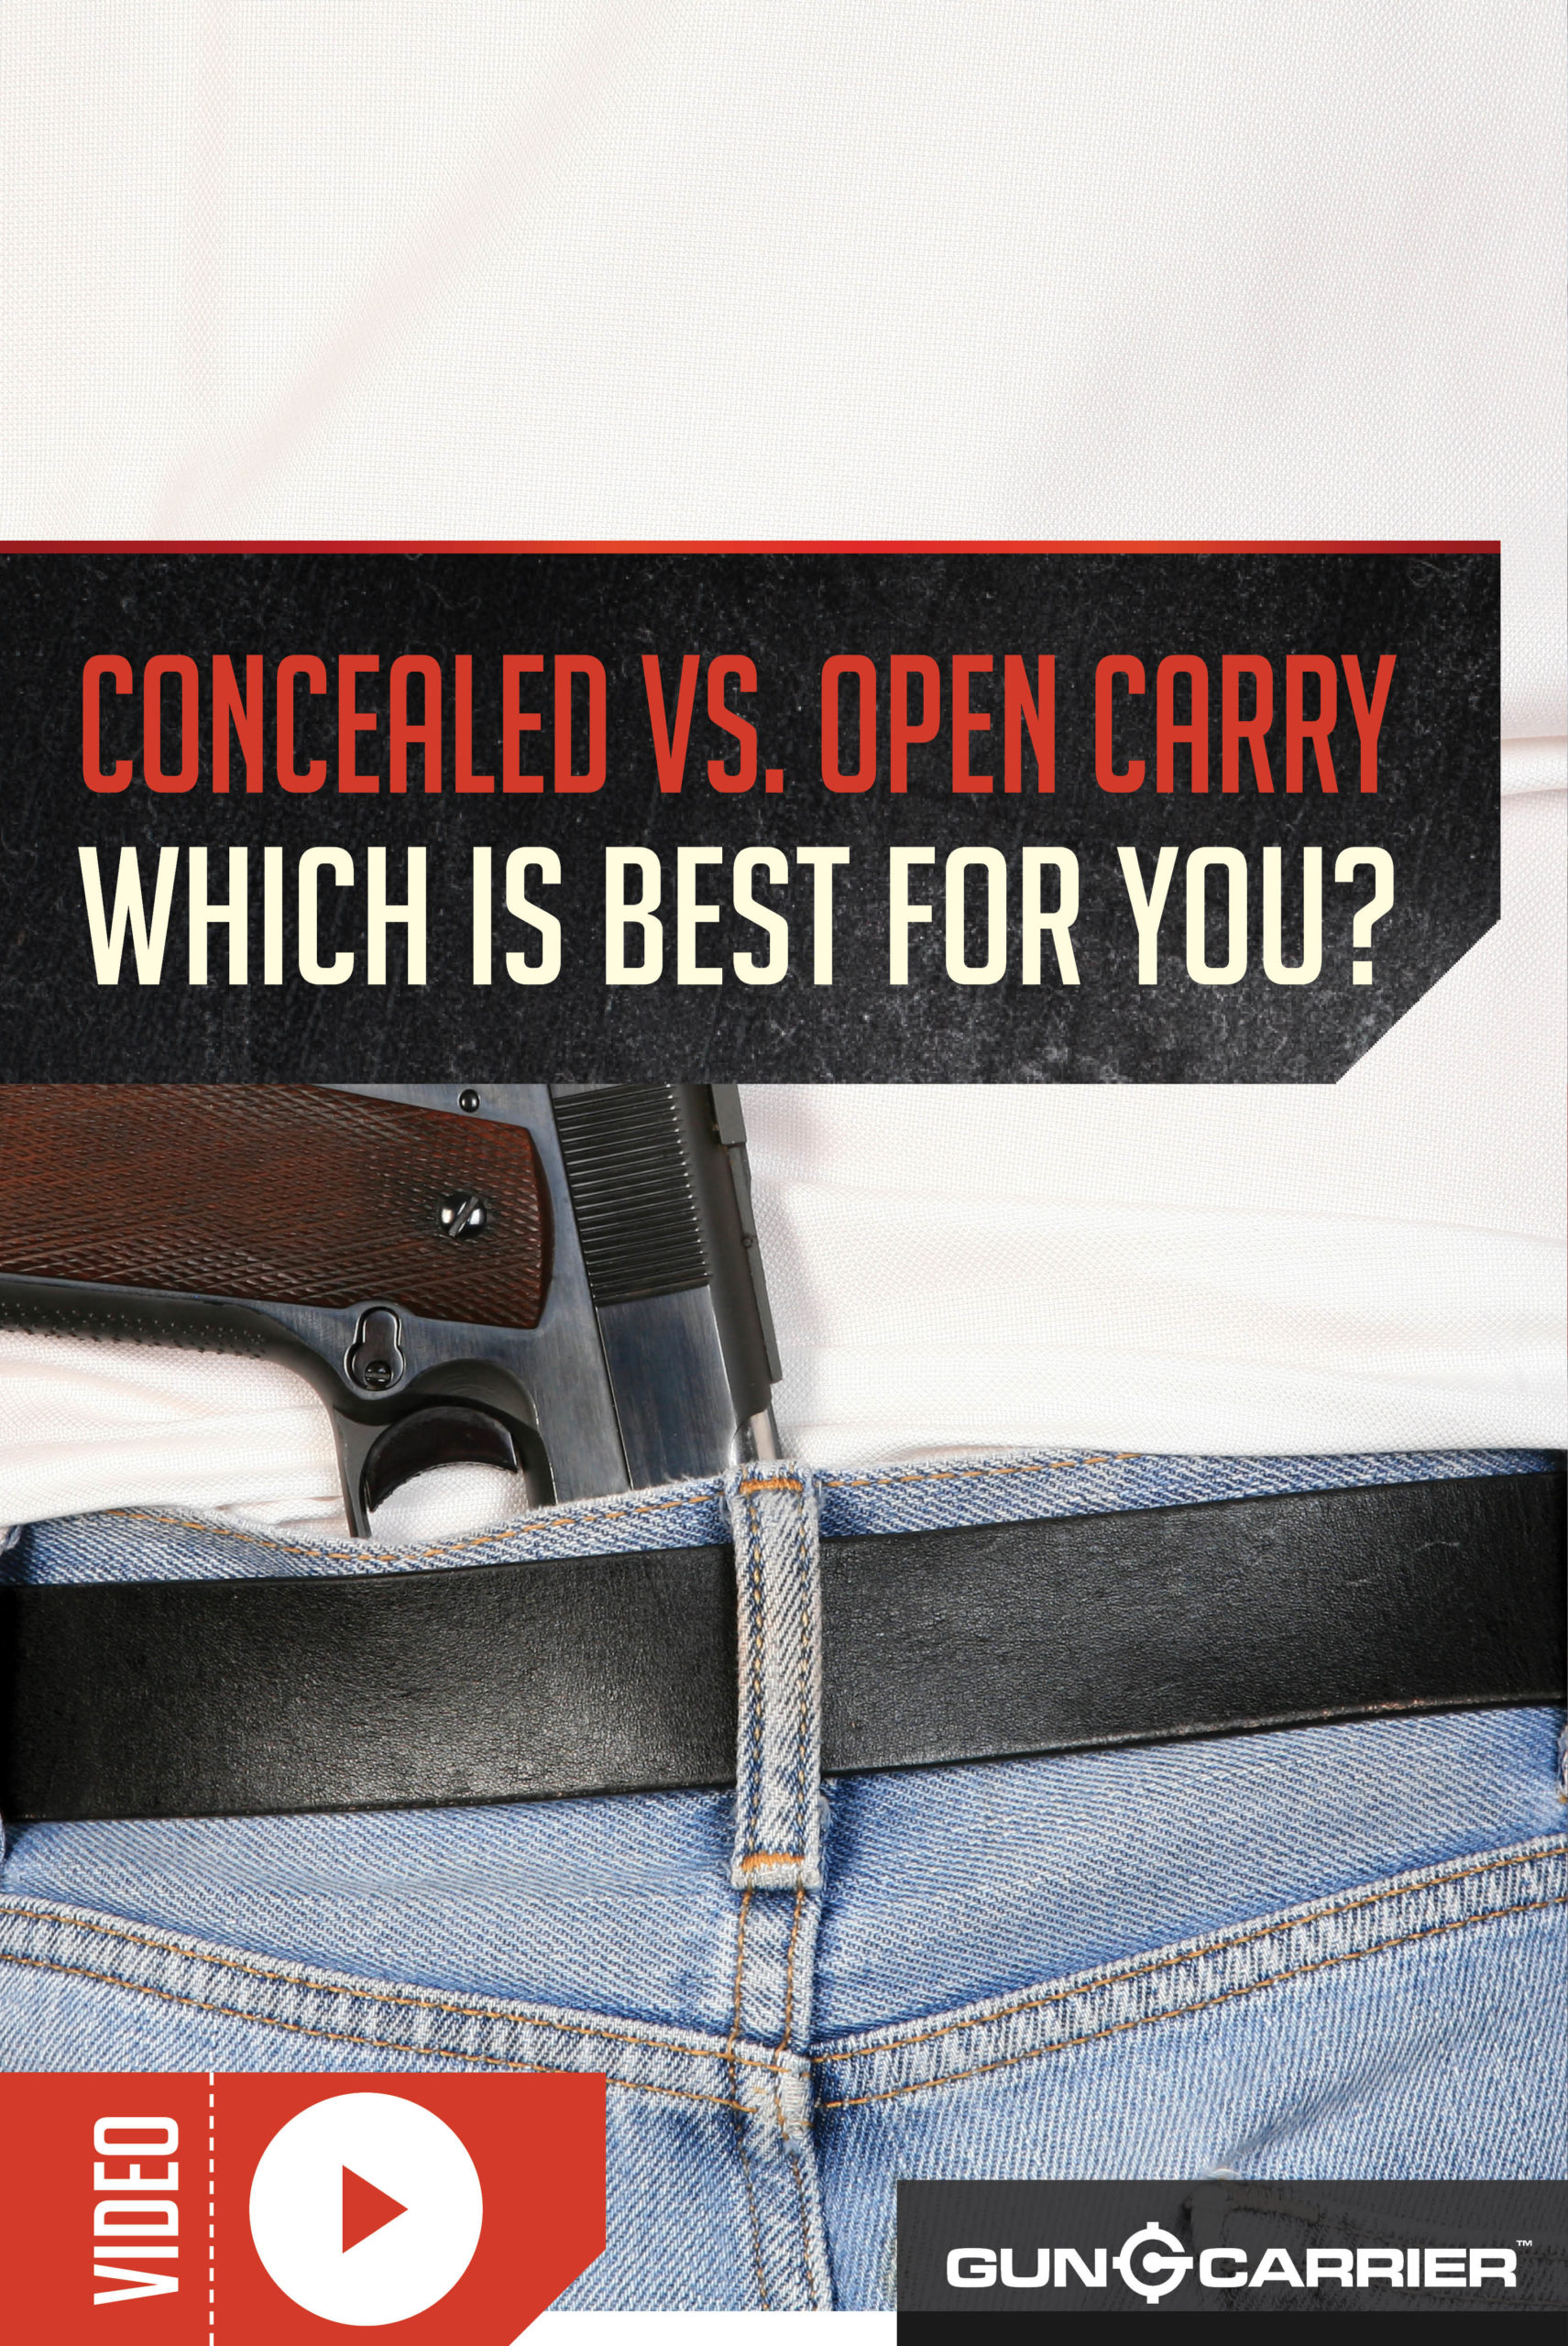 Concealed Carry vs. Open Carry by Gun Carrier at https://guncarriernews.wpengine.com/concealed-carry-vs-open-carry/